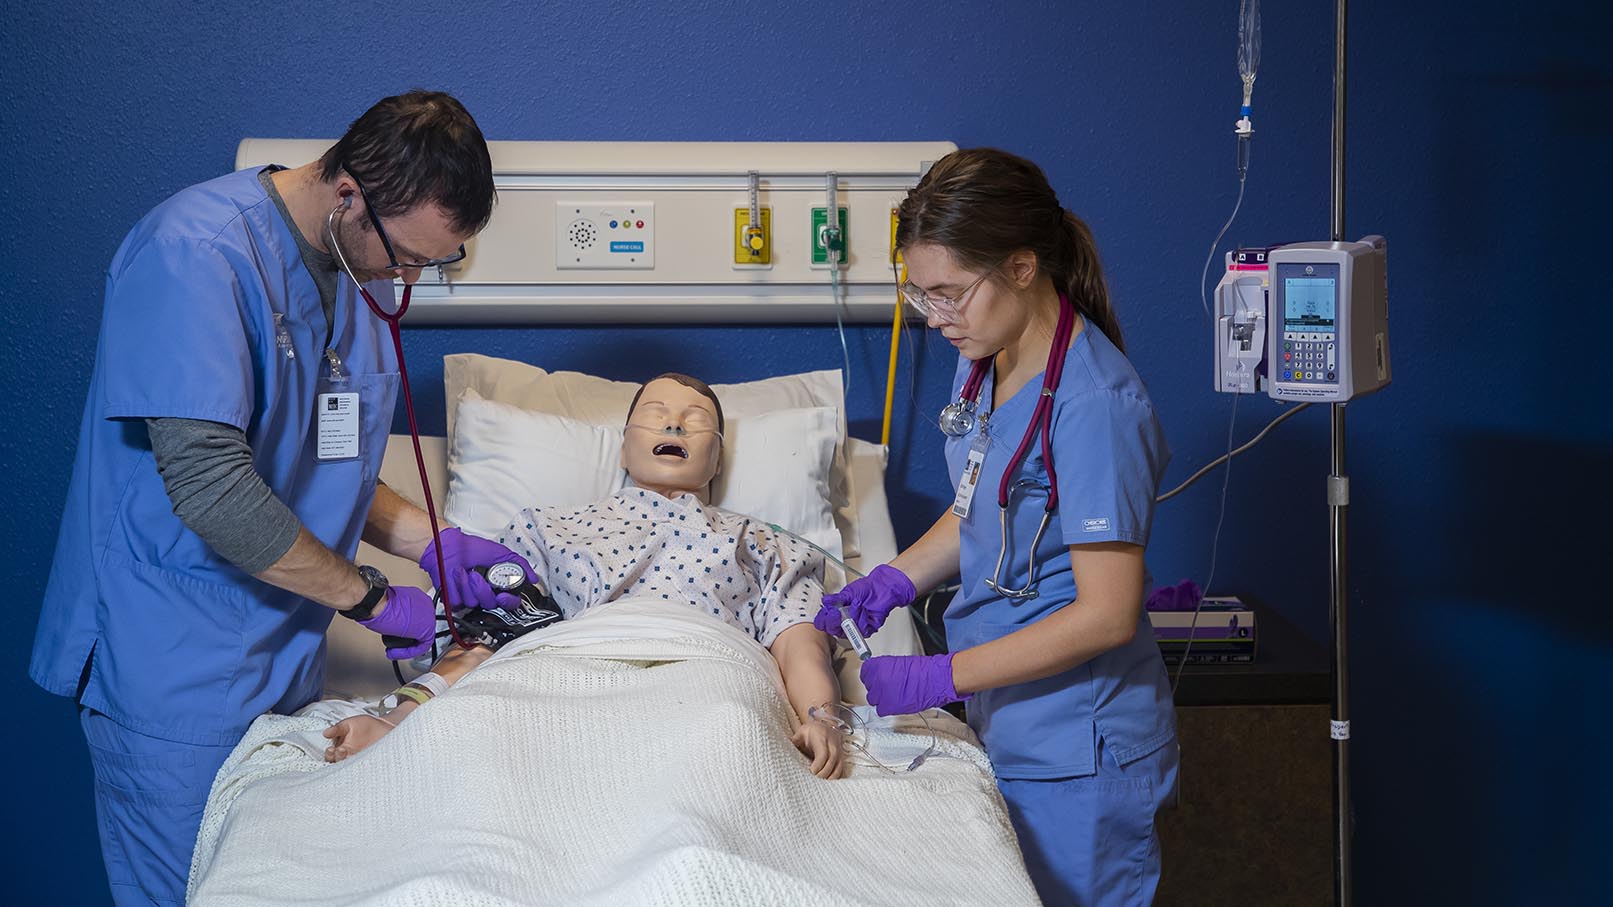 Two nursing student working together on a simulated patient